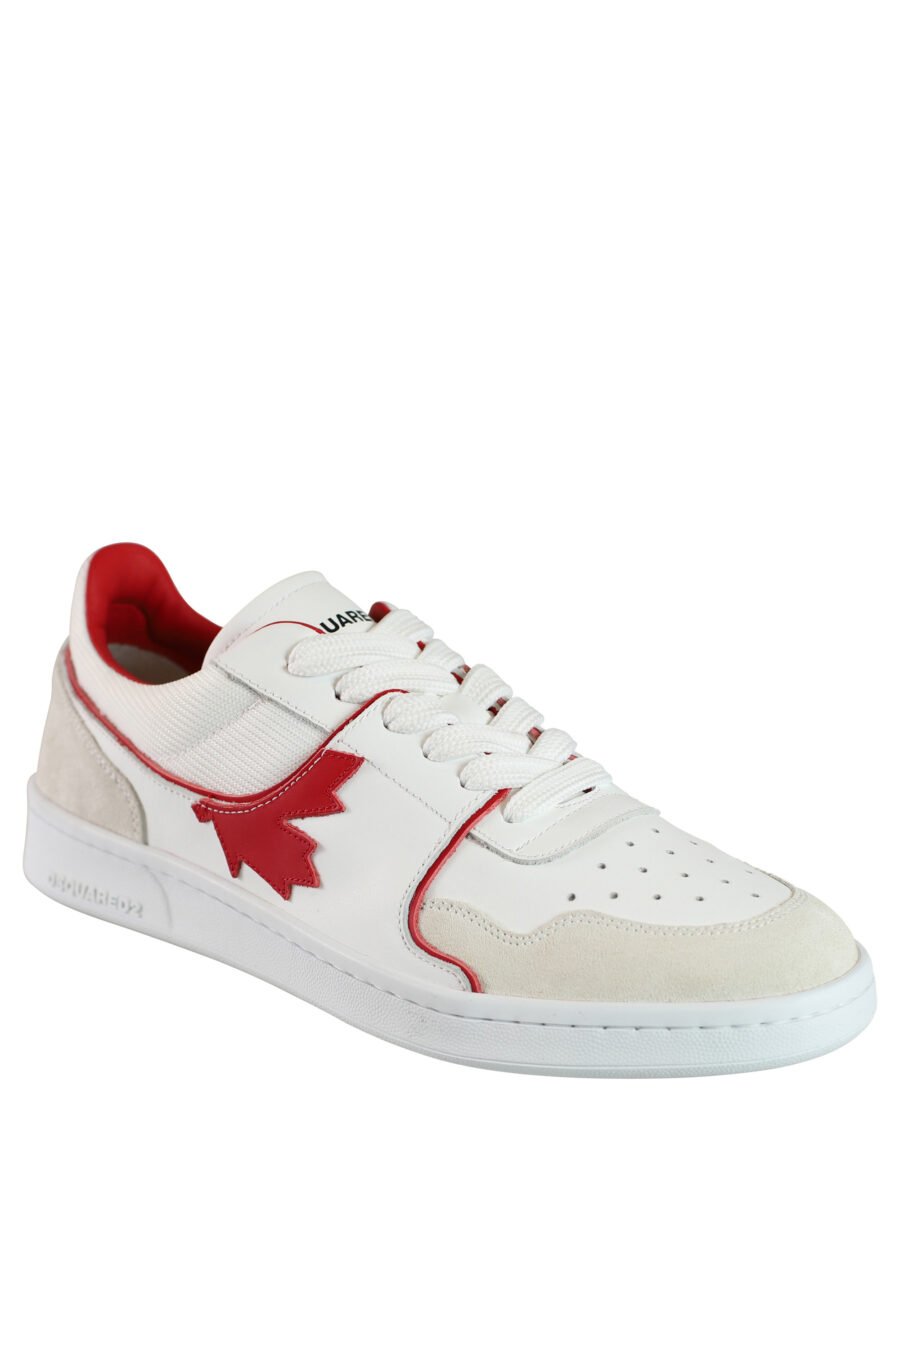 White mix trainers with logo and red details - 8055777188194 2